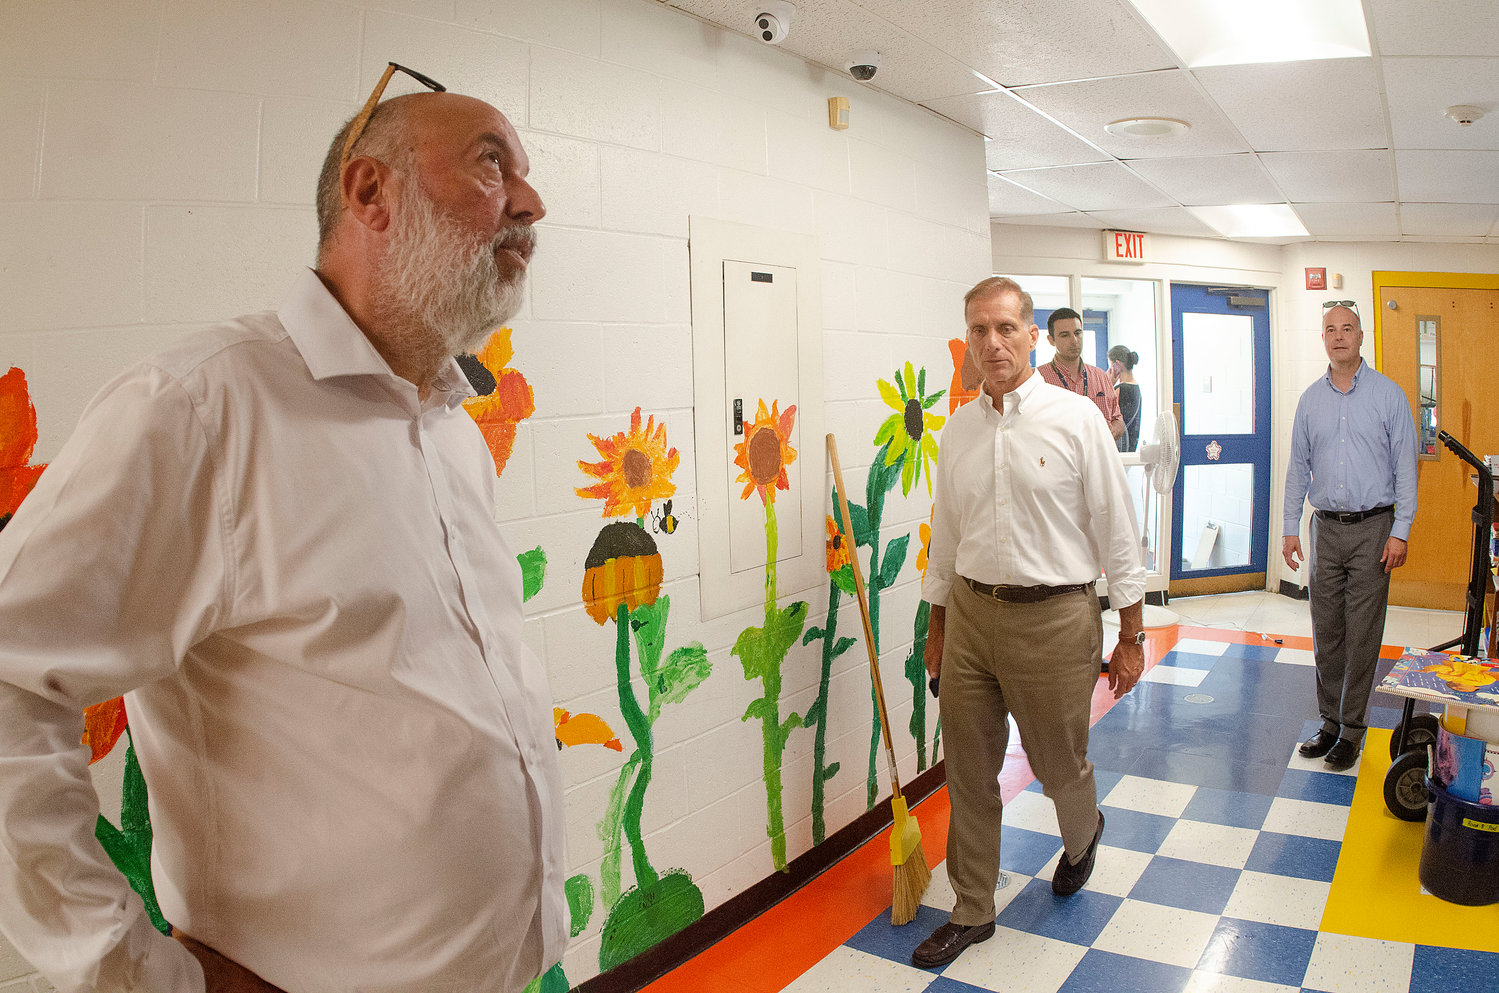 Joseph DaSilva, the coordinator for the state’s school building authority, (left) takes a look at the ceiling tiles at Sowams School during a tour of the local elementary schools. Barrington Superintendent of Schools Michael Messore (middle) and other school officials stand nearby.